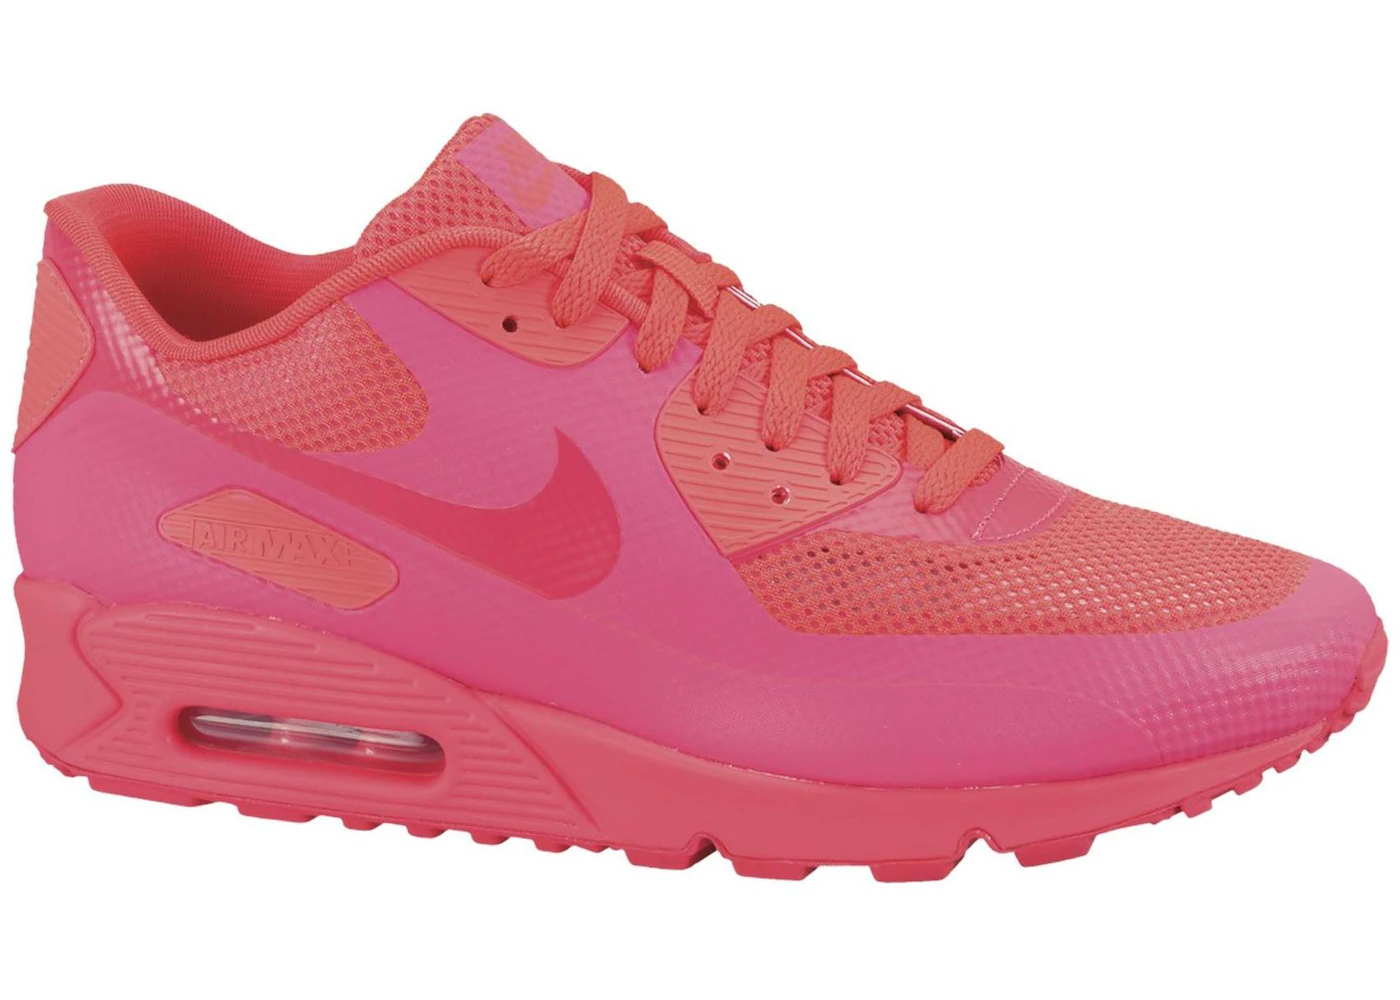 Nike Air Max 90 Hyperfuse Solar Red Men's - 454446-600 - US